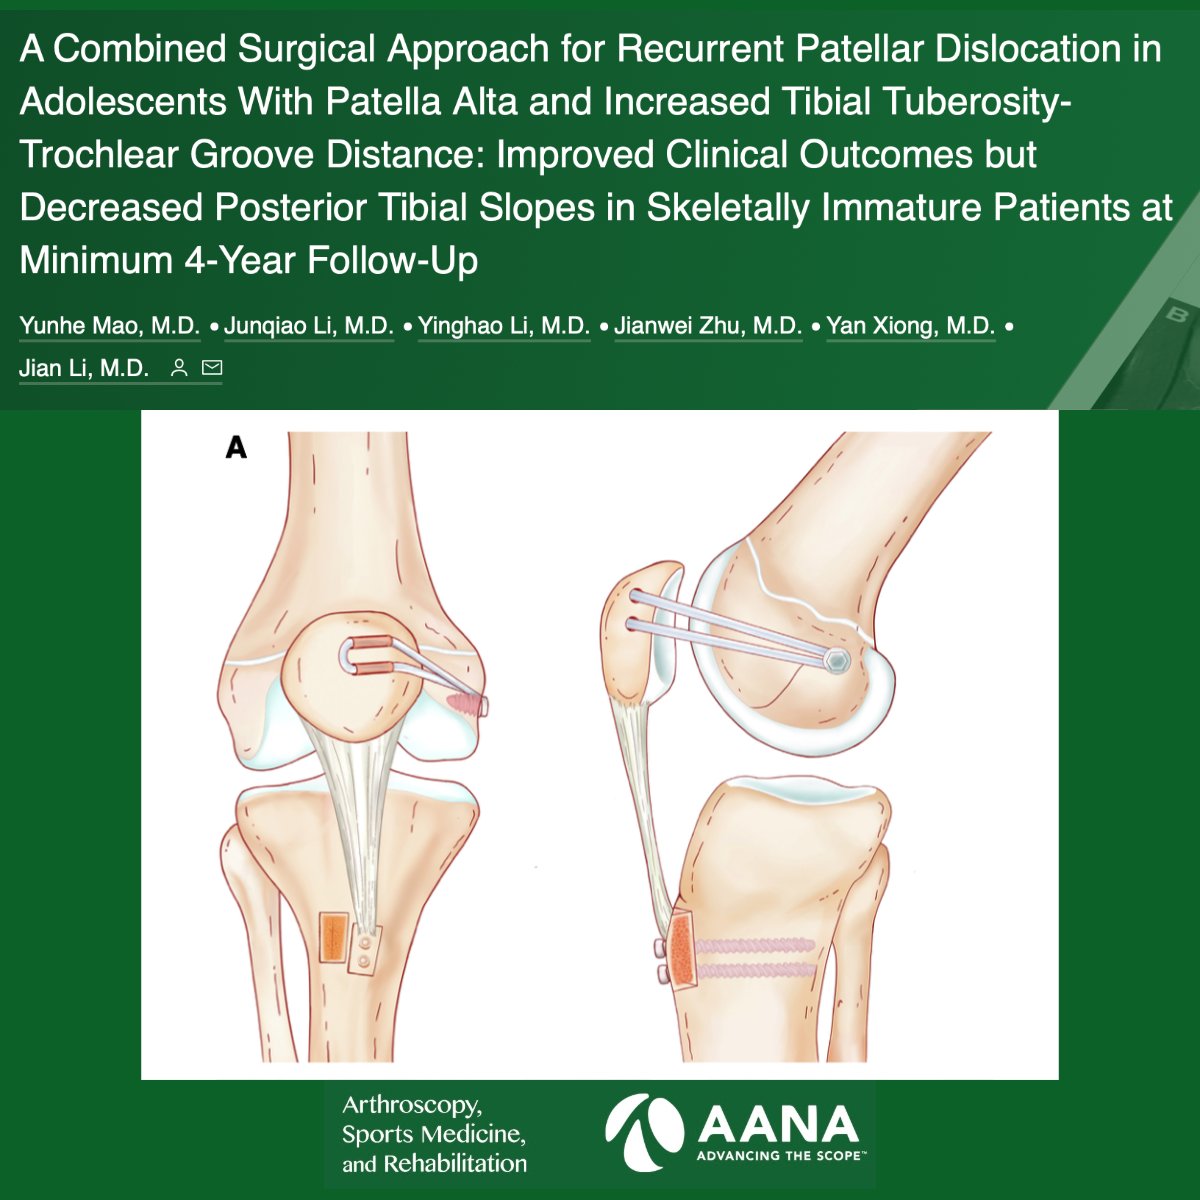 Anatomic MPFL reconstruction and tibial tuberosity transfer in adolescents with patella alta and elevated tibial tuberosity-trochlear groove distance in the treatment of recurrent patellar dislocation resulted in improved knee function. #PatellarDislocation